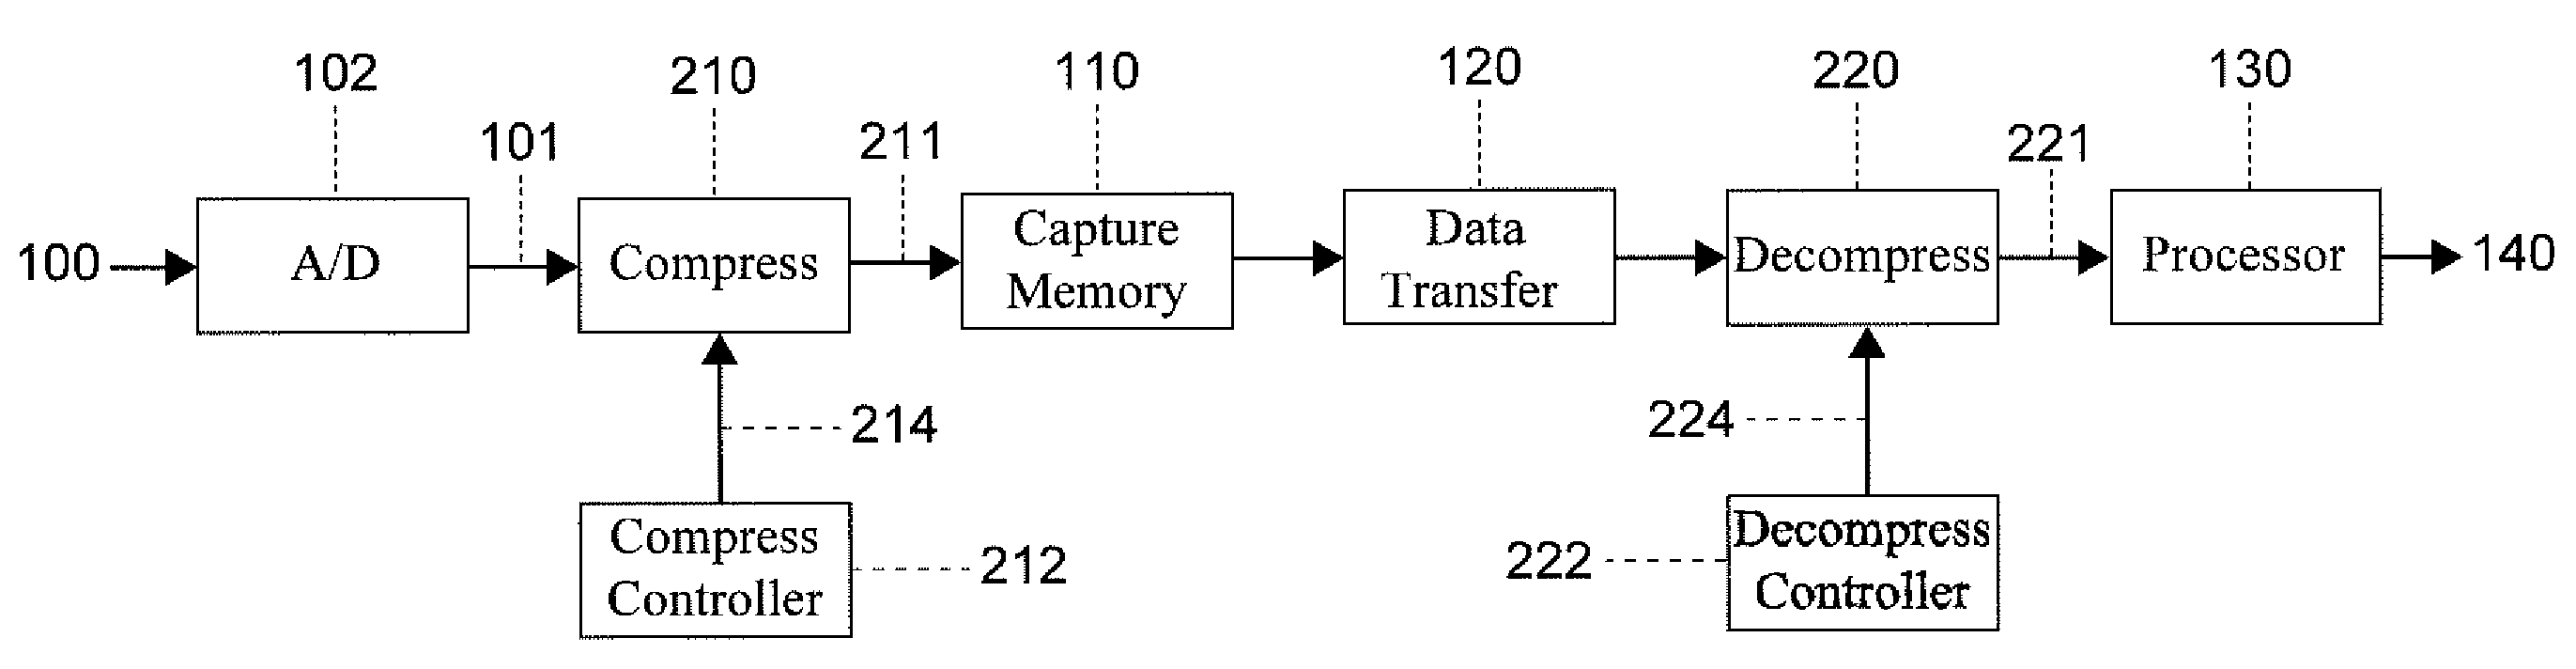 Frequency resolution using compression